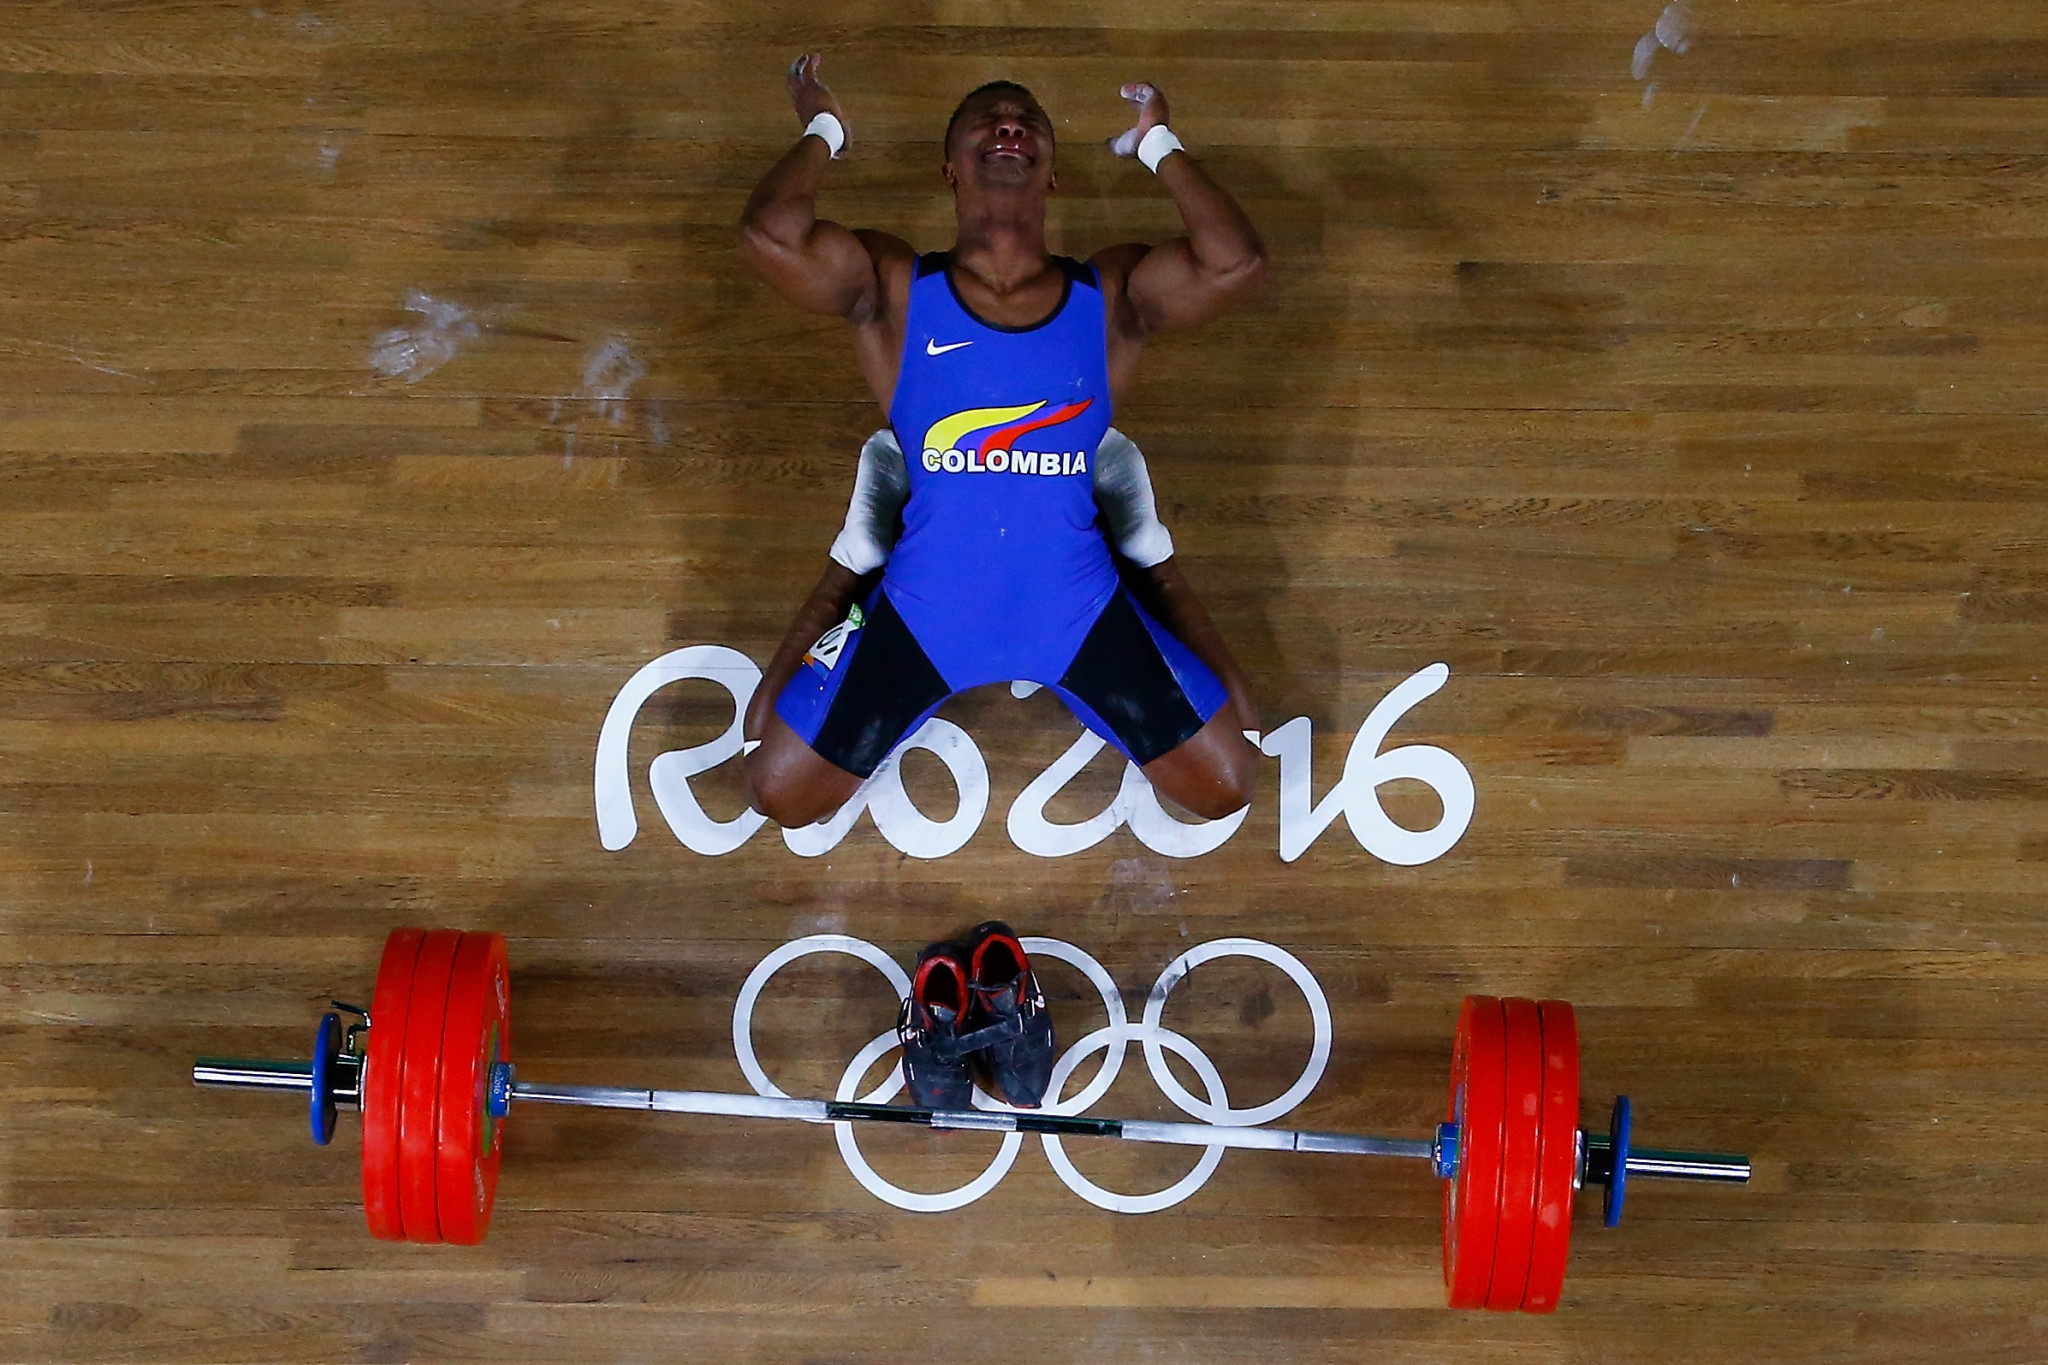 Oscar Figueroa won gold for Colombia in the men's 62kg category at the Rio 2016 Olympic Games ©Getty Images